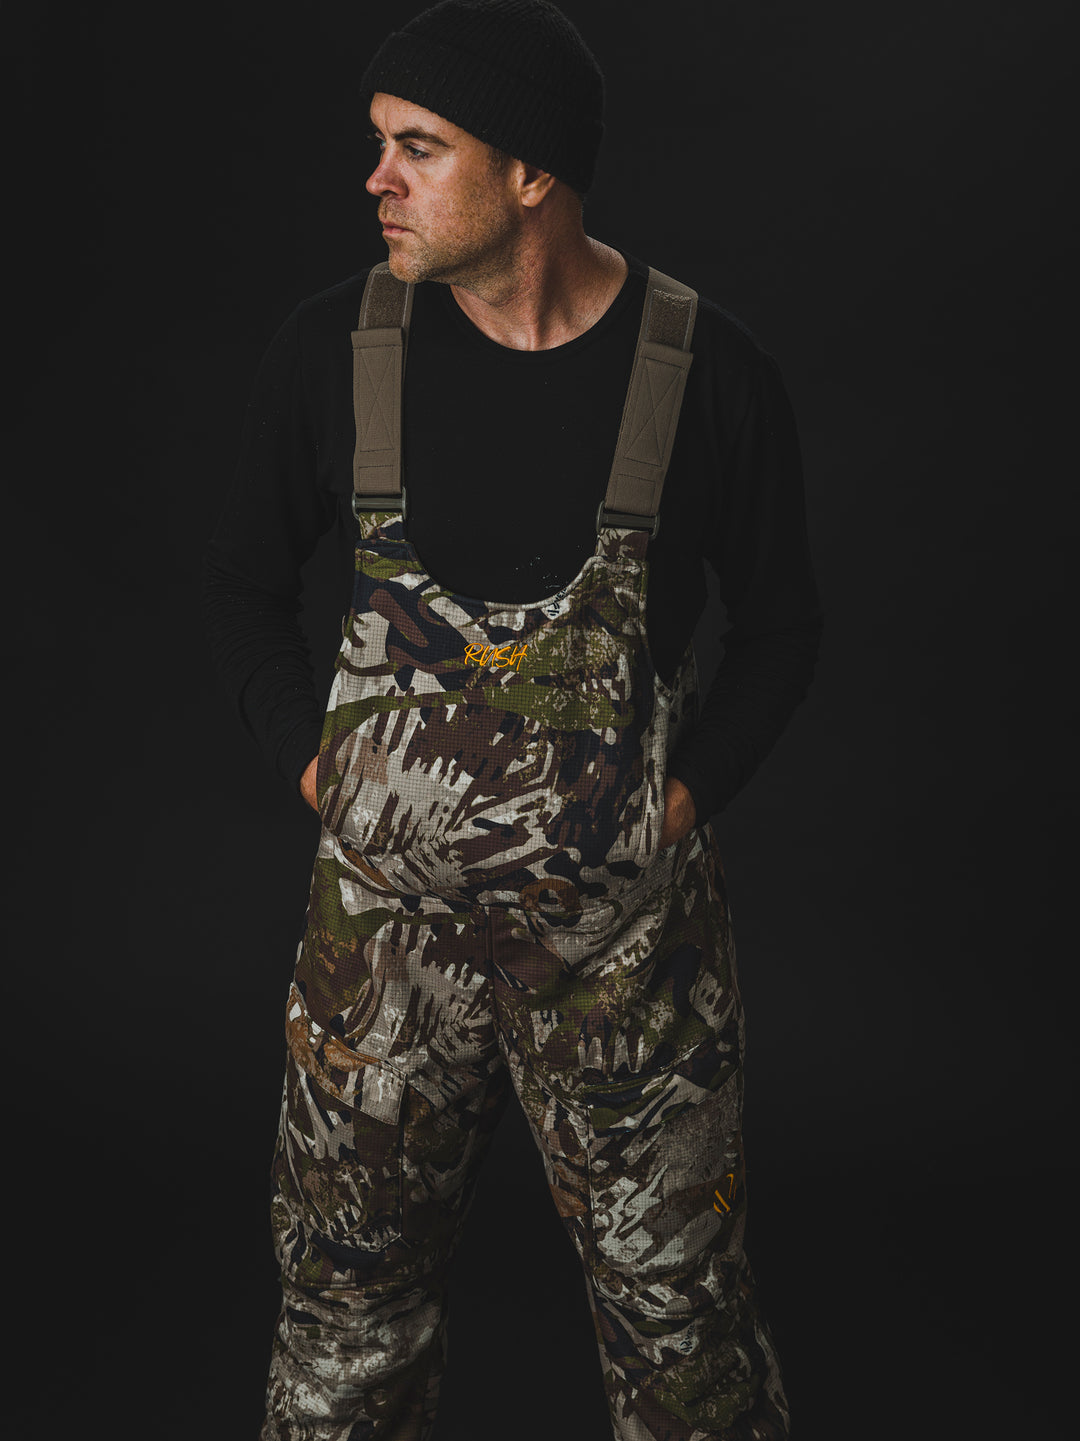 The Chaos Fleece Bib is the ideal piece to have on your next hunt, providing ultimate windproof and warmth, keeping you dry on those cold and snowy days.PROTECTION Quick-drying | Windproof | Waterproof MATERIAL Exterior: 100% Brushed Polyester Fleece Mid-layer: 3L Lamination Interior: High-pile fleece FIT Midweight | Multi-season CONDITIONS Mild | Dry | Cold | Wet | Wind PATTERN Veil® Camo - Rush | Veil® Camo - Shred | Veil® Camo - Grind